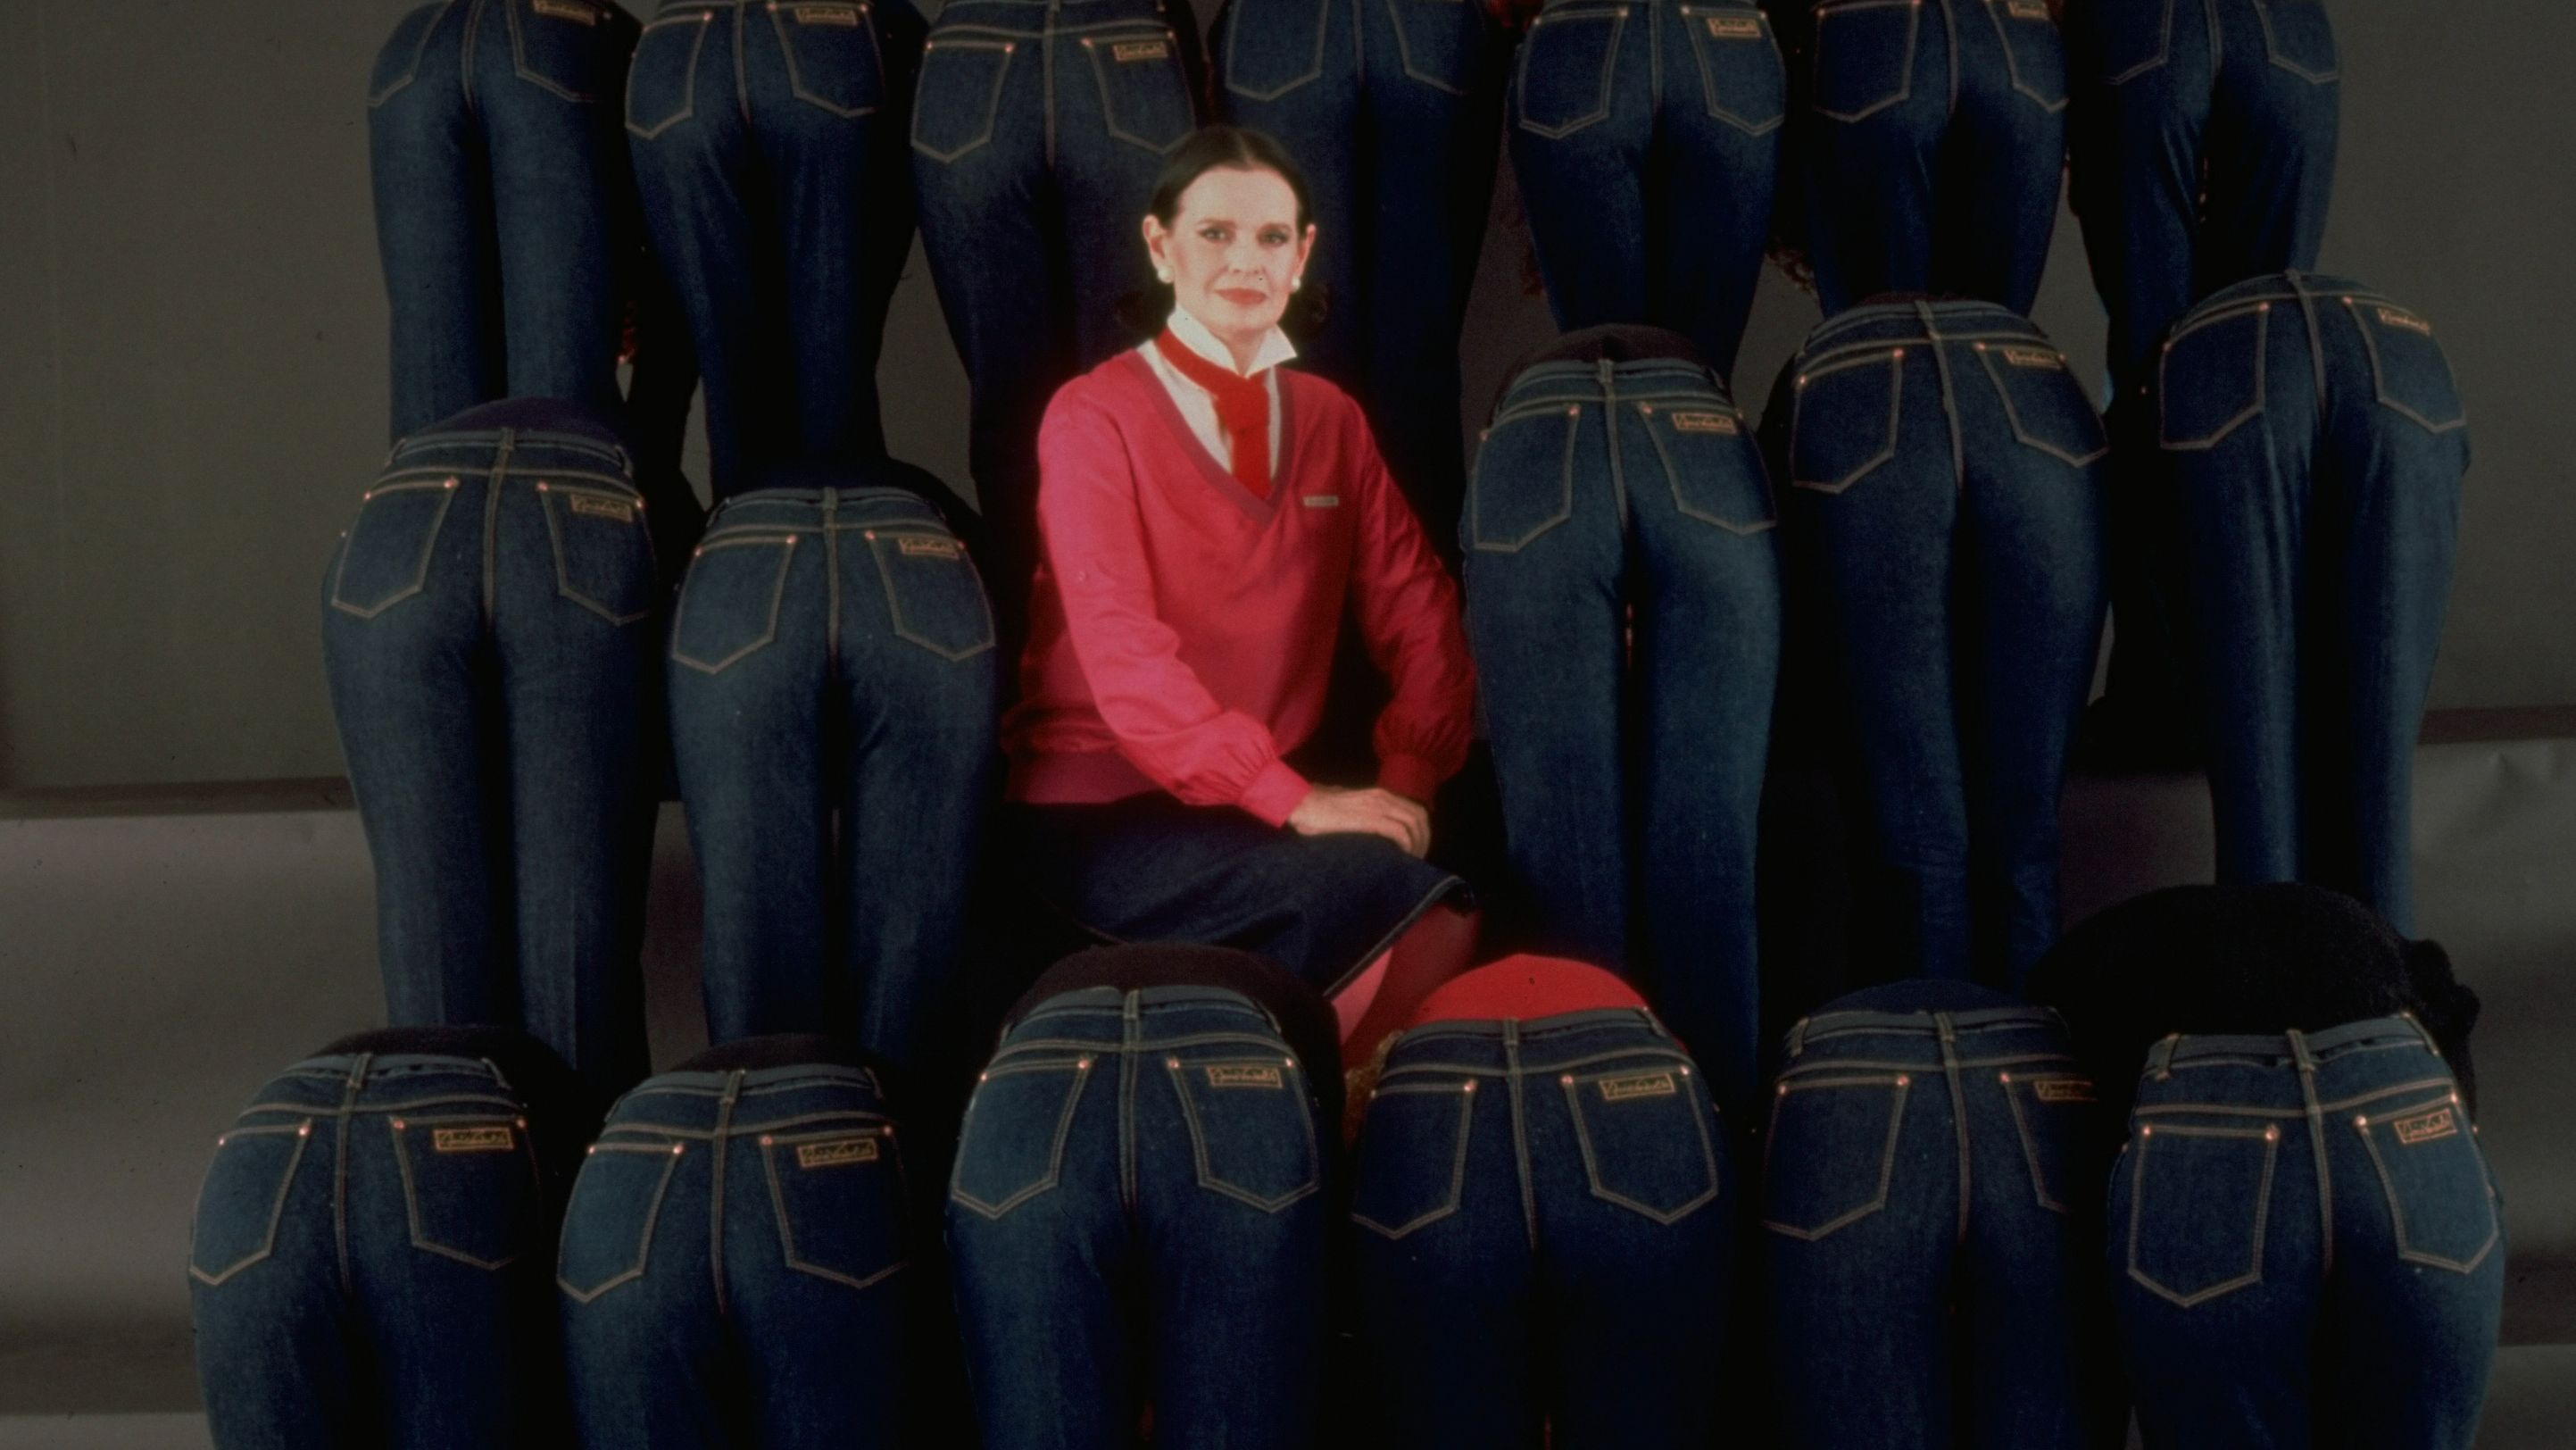 Vanderbilt produced fashion and textile designs that would earn her the 1969 Neiman Marcus Fashion Award, and in 1976 she started a line of ready-to-wear garments. Under her GV Ltd. brand, she'd go on to sell millions of pairs of jeans bearing her trademark swan logo.